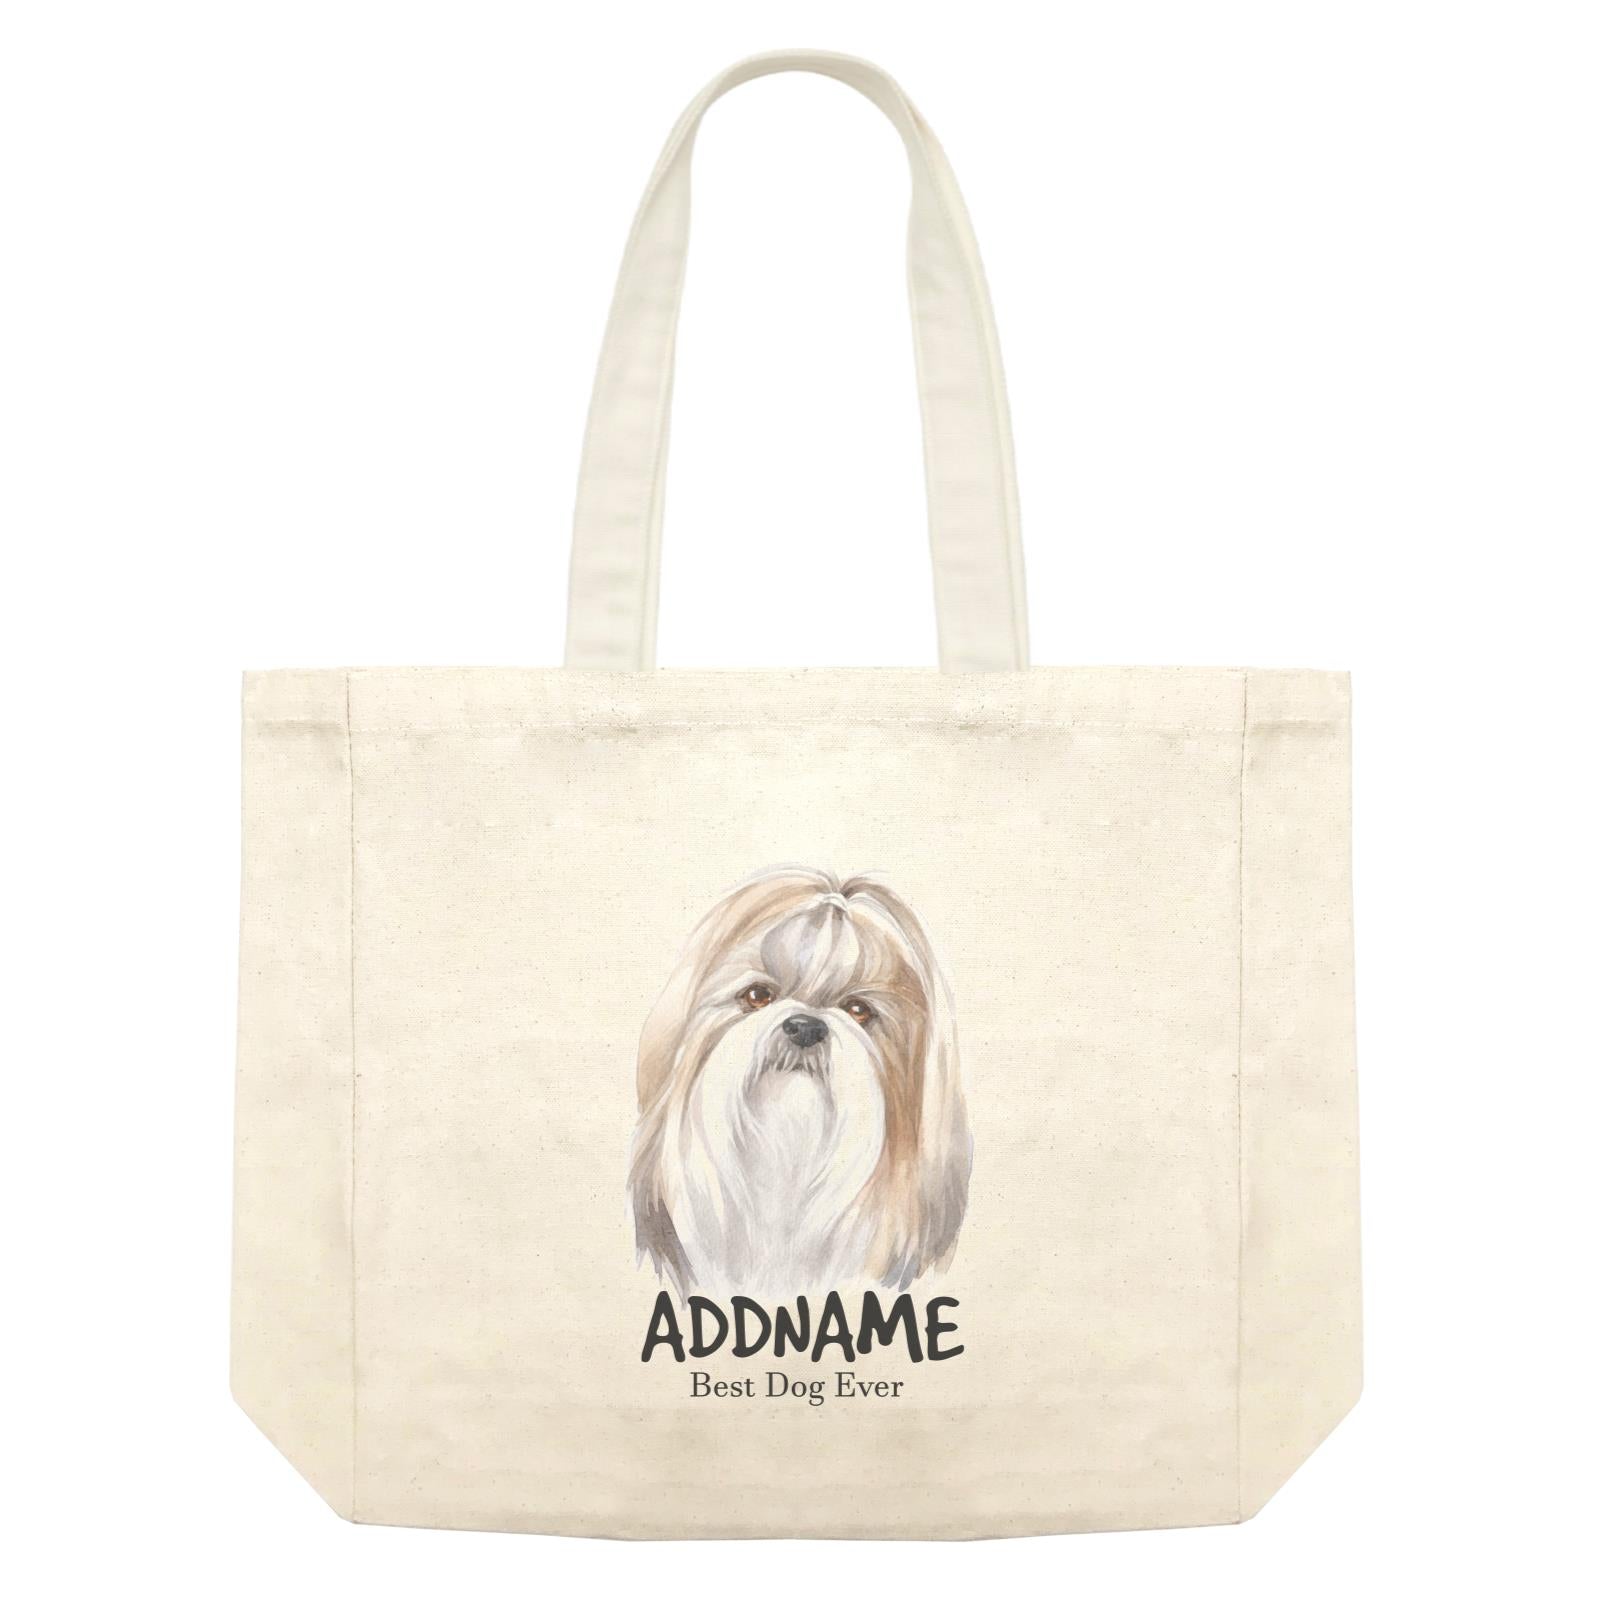 Watercolor Dog Shih Tzu Tie Hair Best Dog Ever Addname Shopping Bag